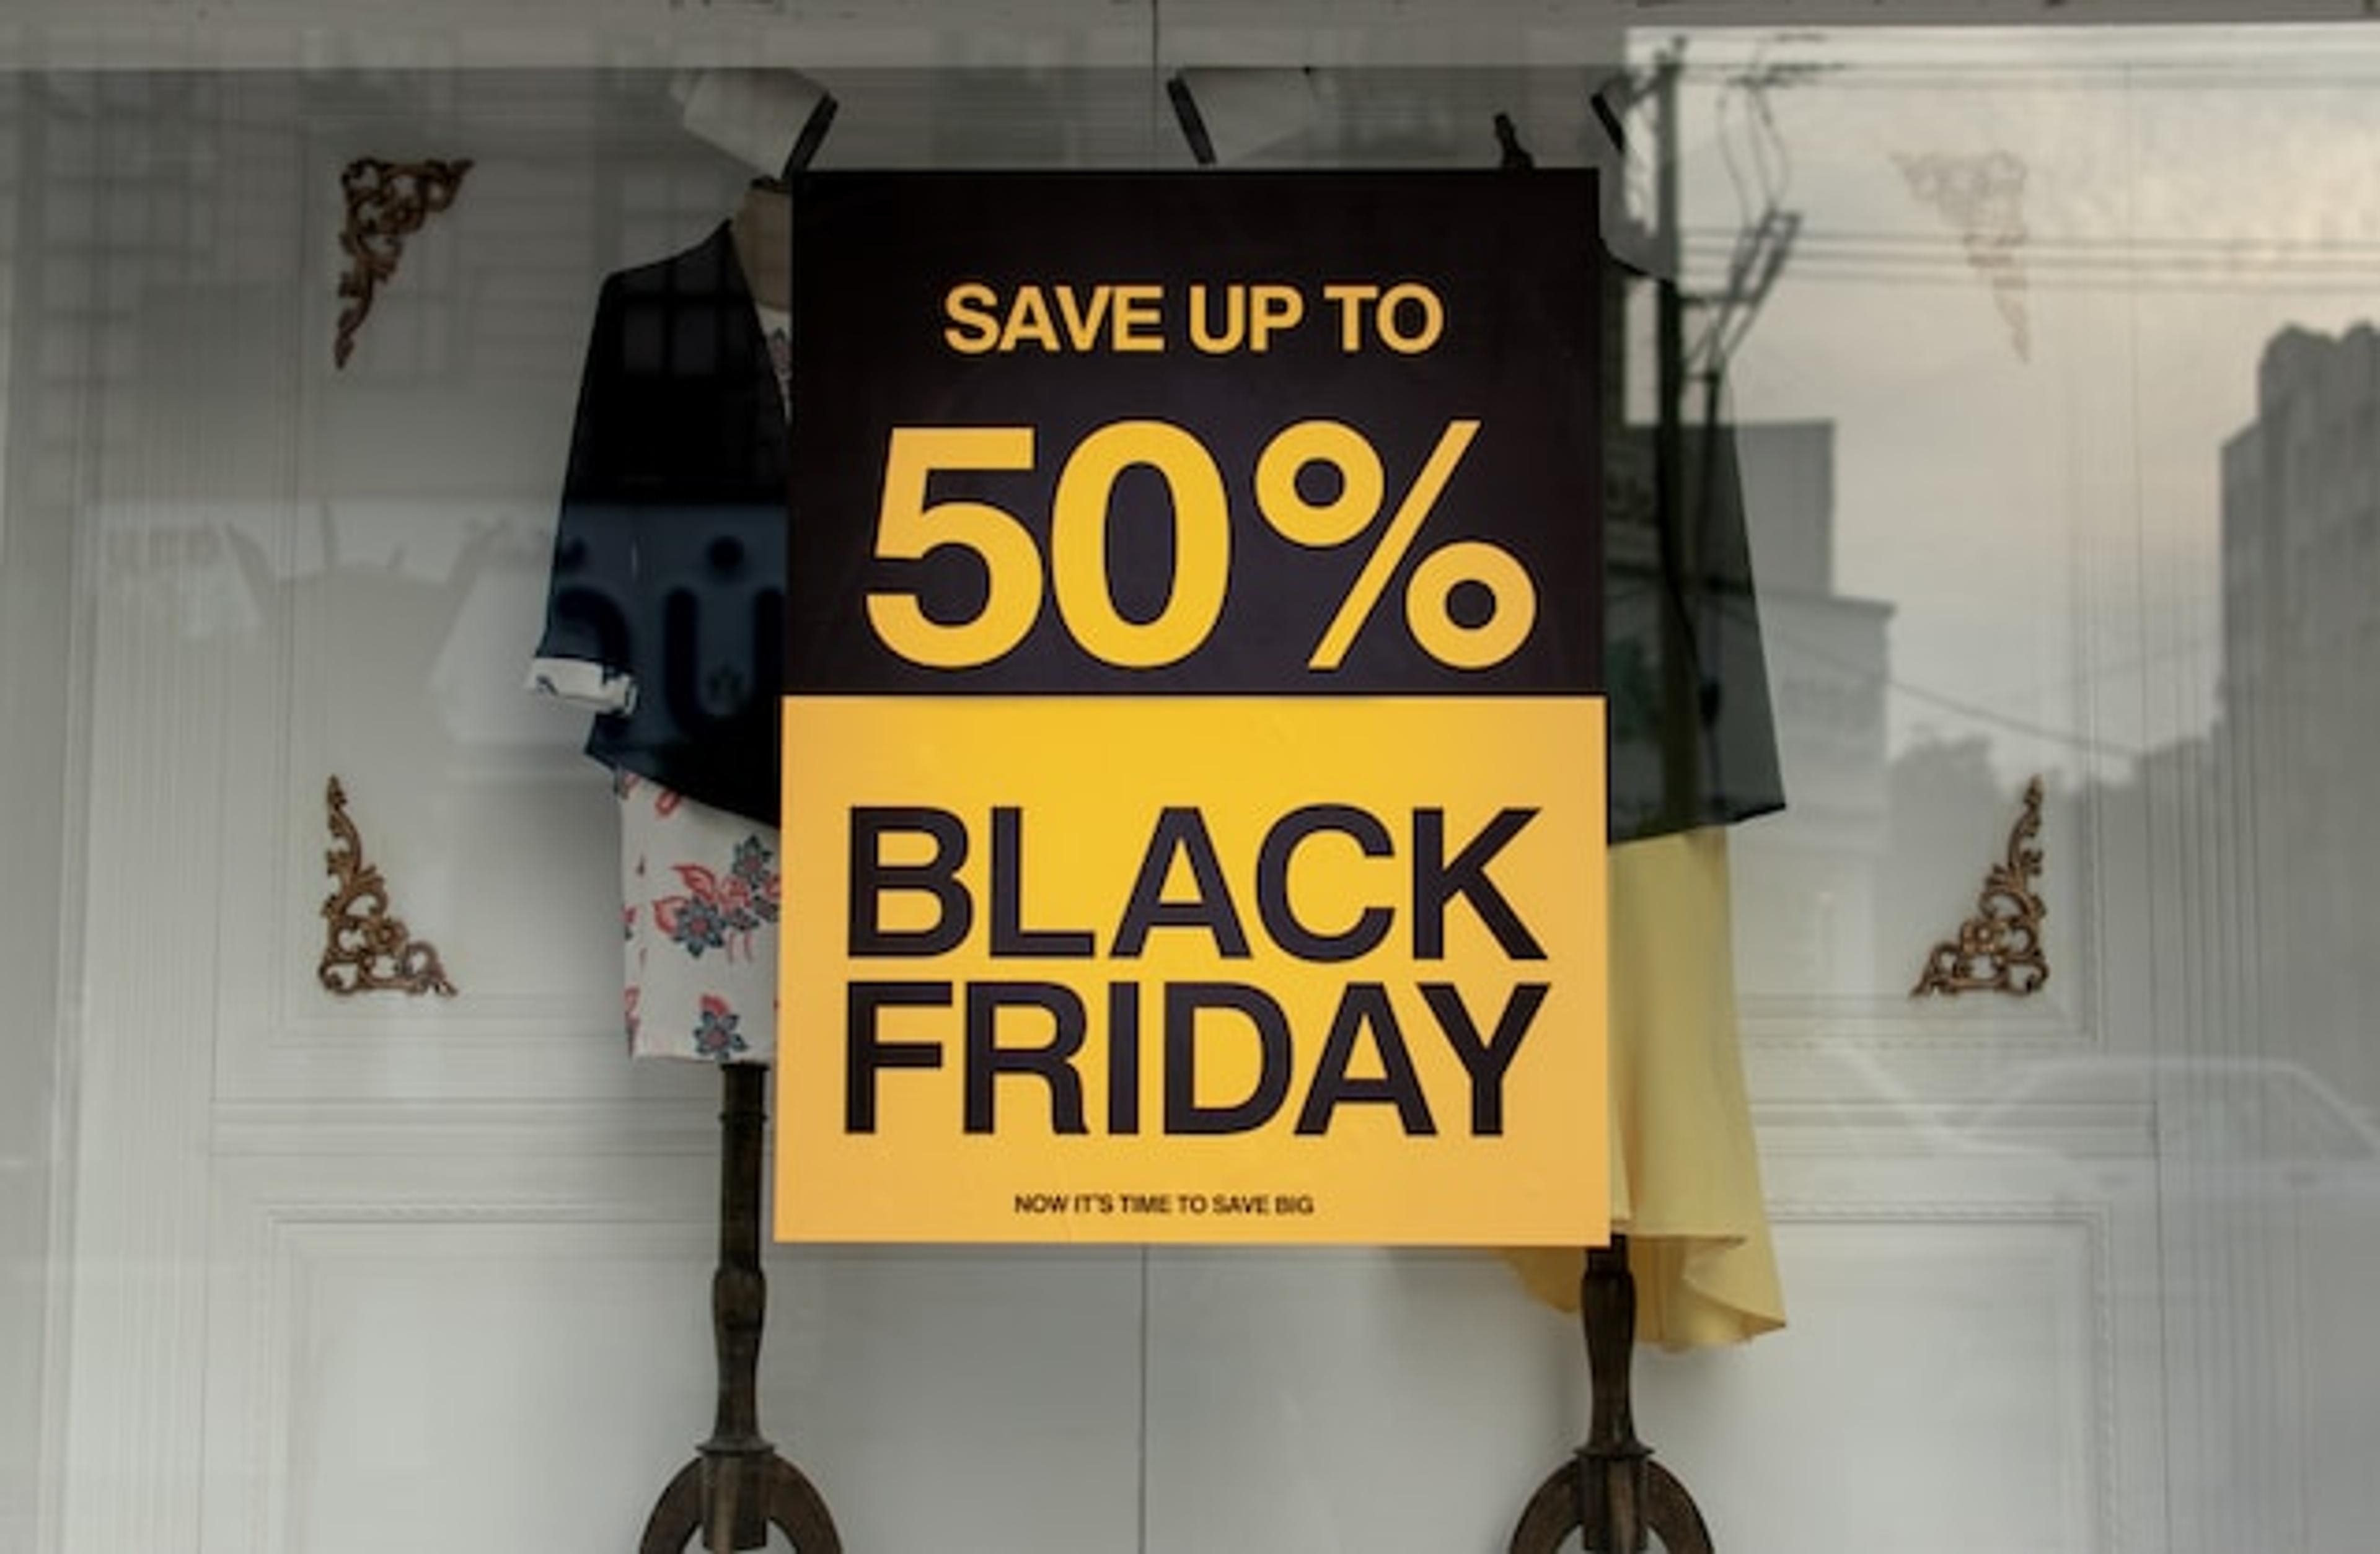 Image of a brick-and-mortar store featuring a 50% Black Friday sale.